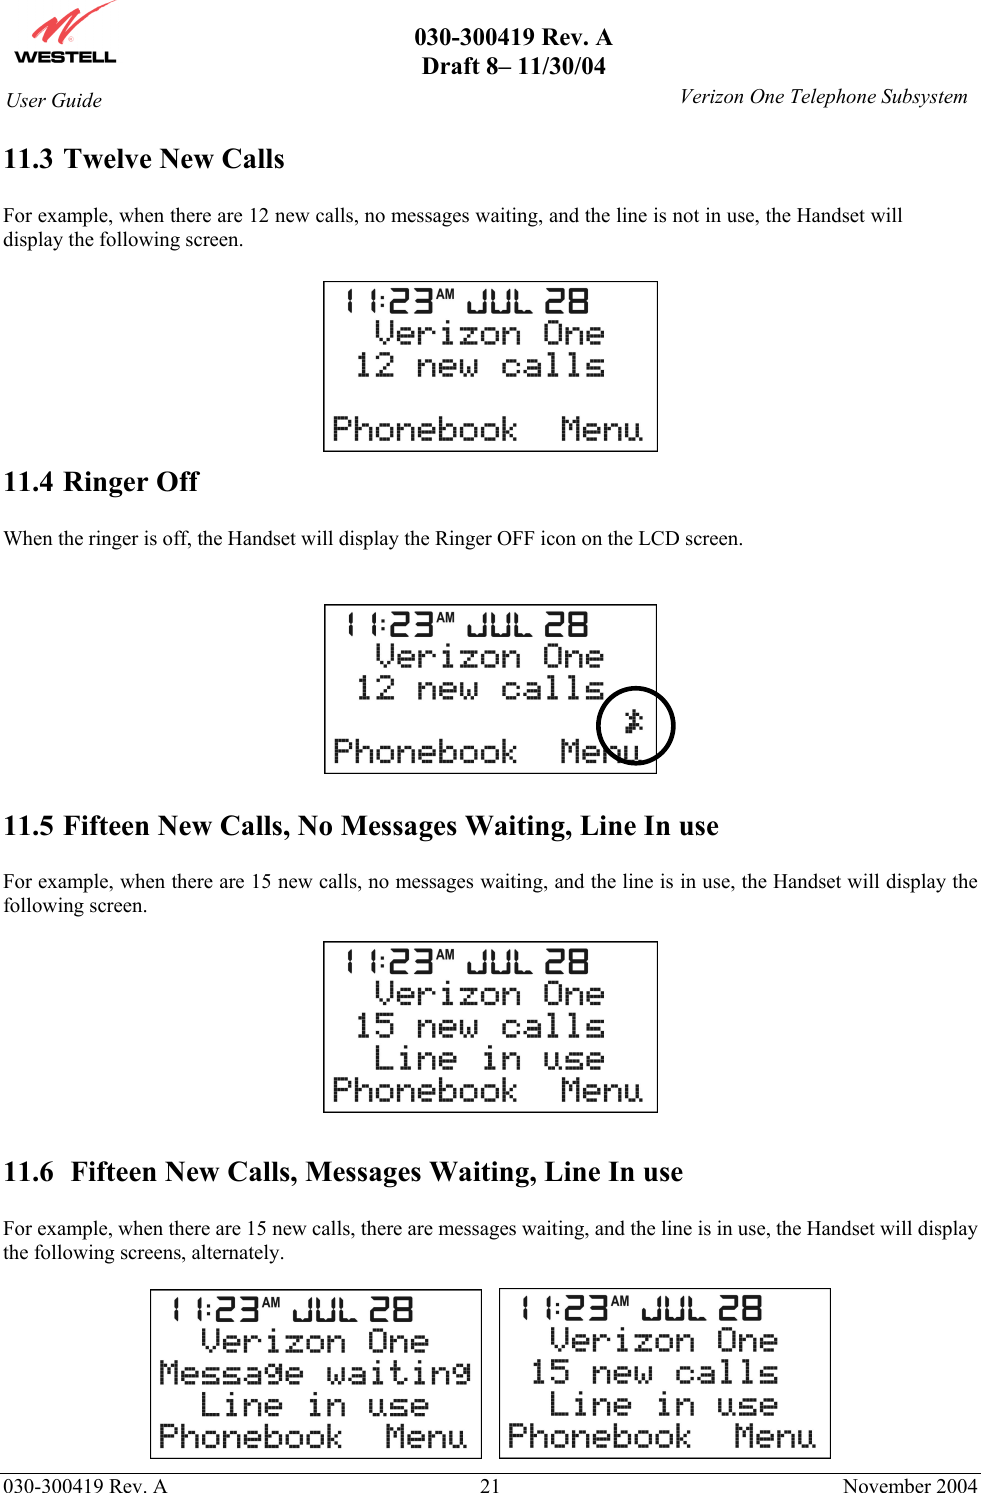       030-300419 Rev. A Draft 8– 11/30/04    030-300419 Rev. A  21  November 2004 User Guide   Verizon One Telephone Subsystem11.3 Twelve New Calls  For example, when there are 12 new calls, no messages waiting, and the line is not in use, the Handset will display the following screen.   11.4 Ringer Off  When the ringer is off, the Handset will display the Ringer OFF icon on the LCD screen.     11.5 Fifteen New Calls, No Messages Waiting, Line In use  For example, when there are 15 new calls, no messages waiting, and the line is in use, the Handset will display the following screen.    11.6  Fifteen New Calls, Messages Waiting, Line In use  For example, when there are 15 new calls, there are messages waiting, and the line is in use, the Handset will display the following screens, alternately.       